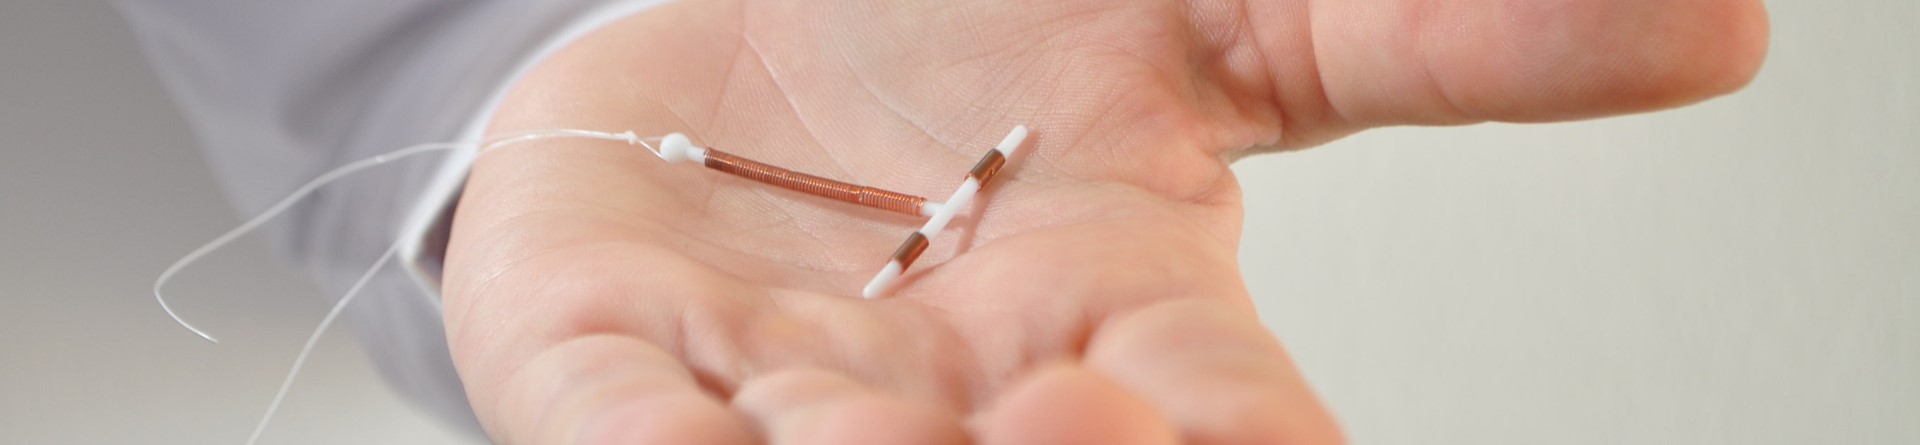 Photo of a hand holding a copper IUD